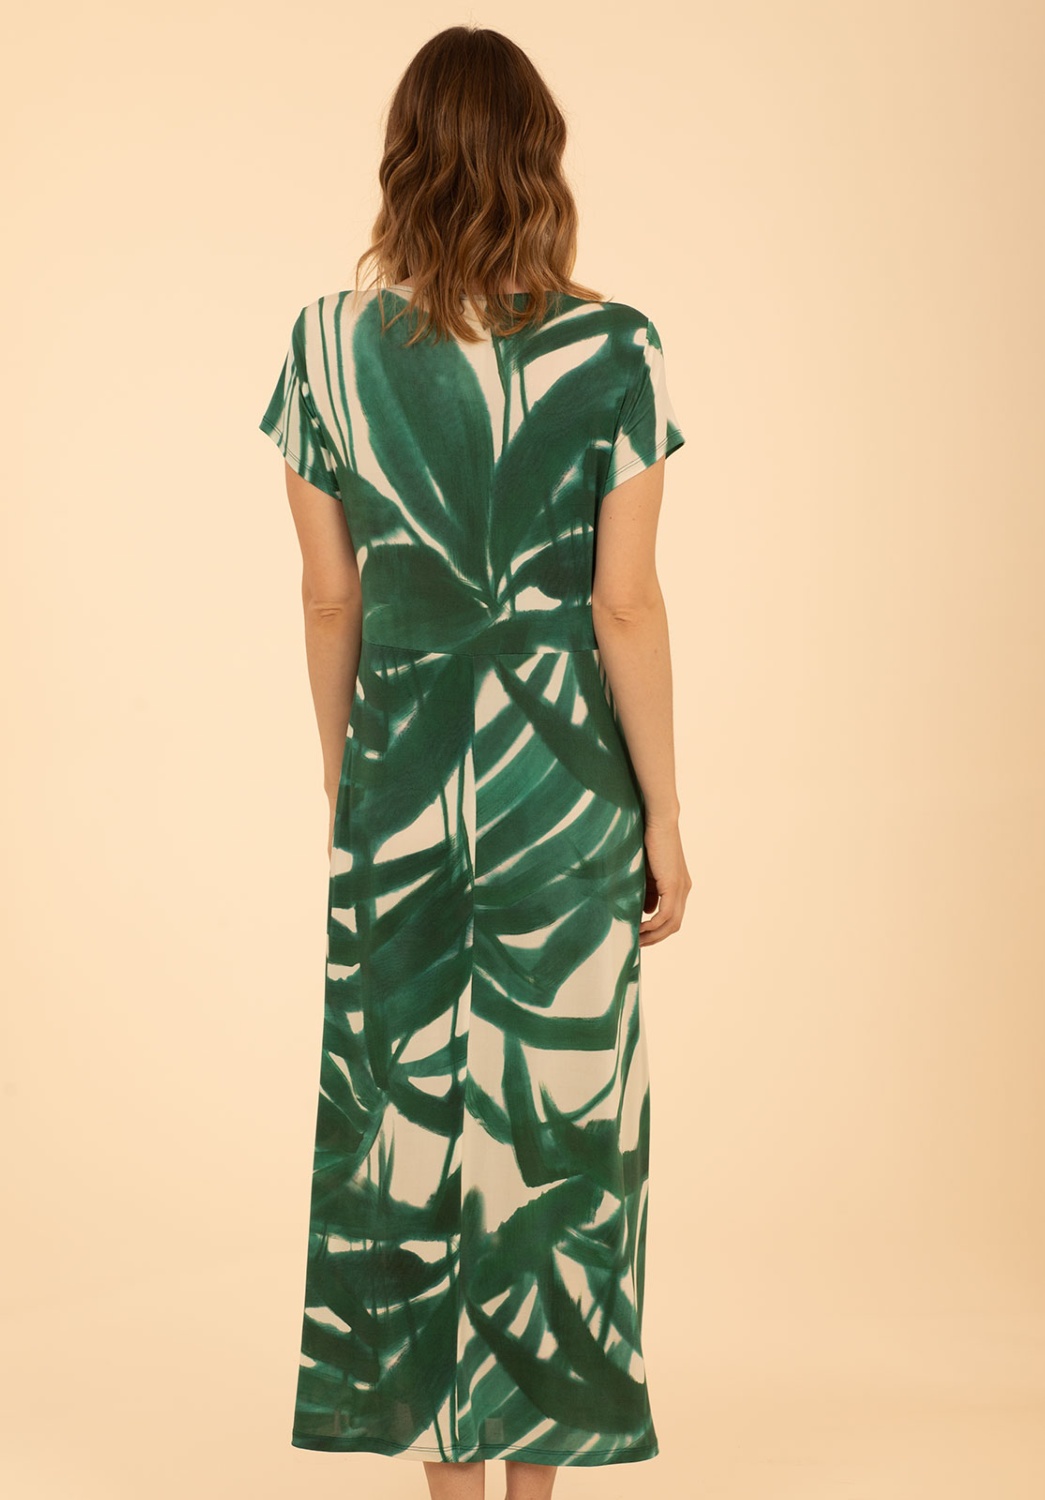 Knotted Leaves Dress 3